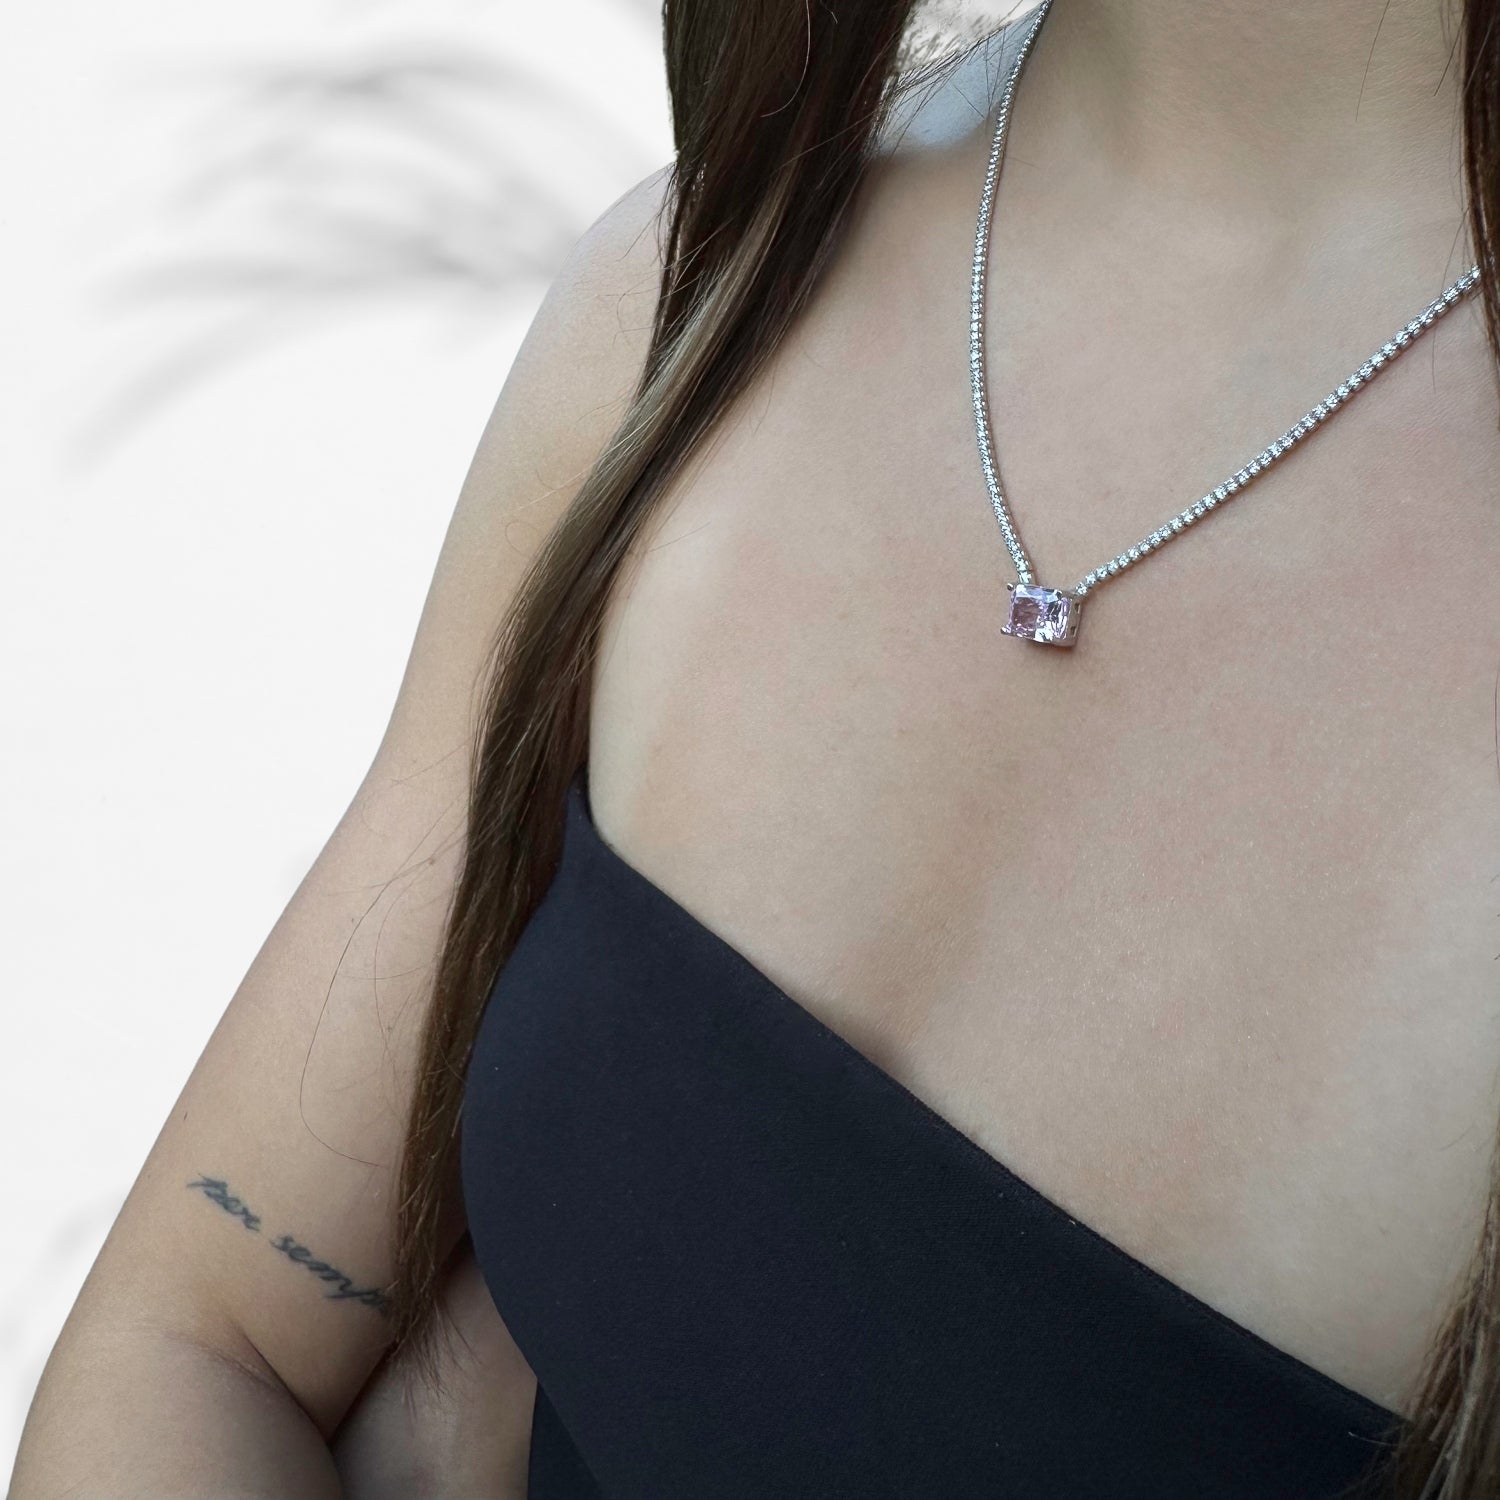 Model Wearing Luxurious Treat: Sterling Silver Necklace with Diamond Chain and Pink Quartz